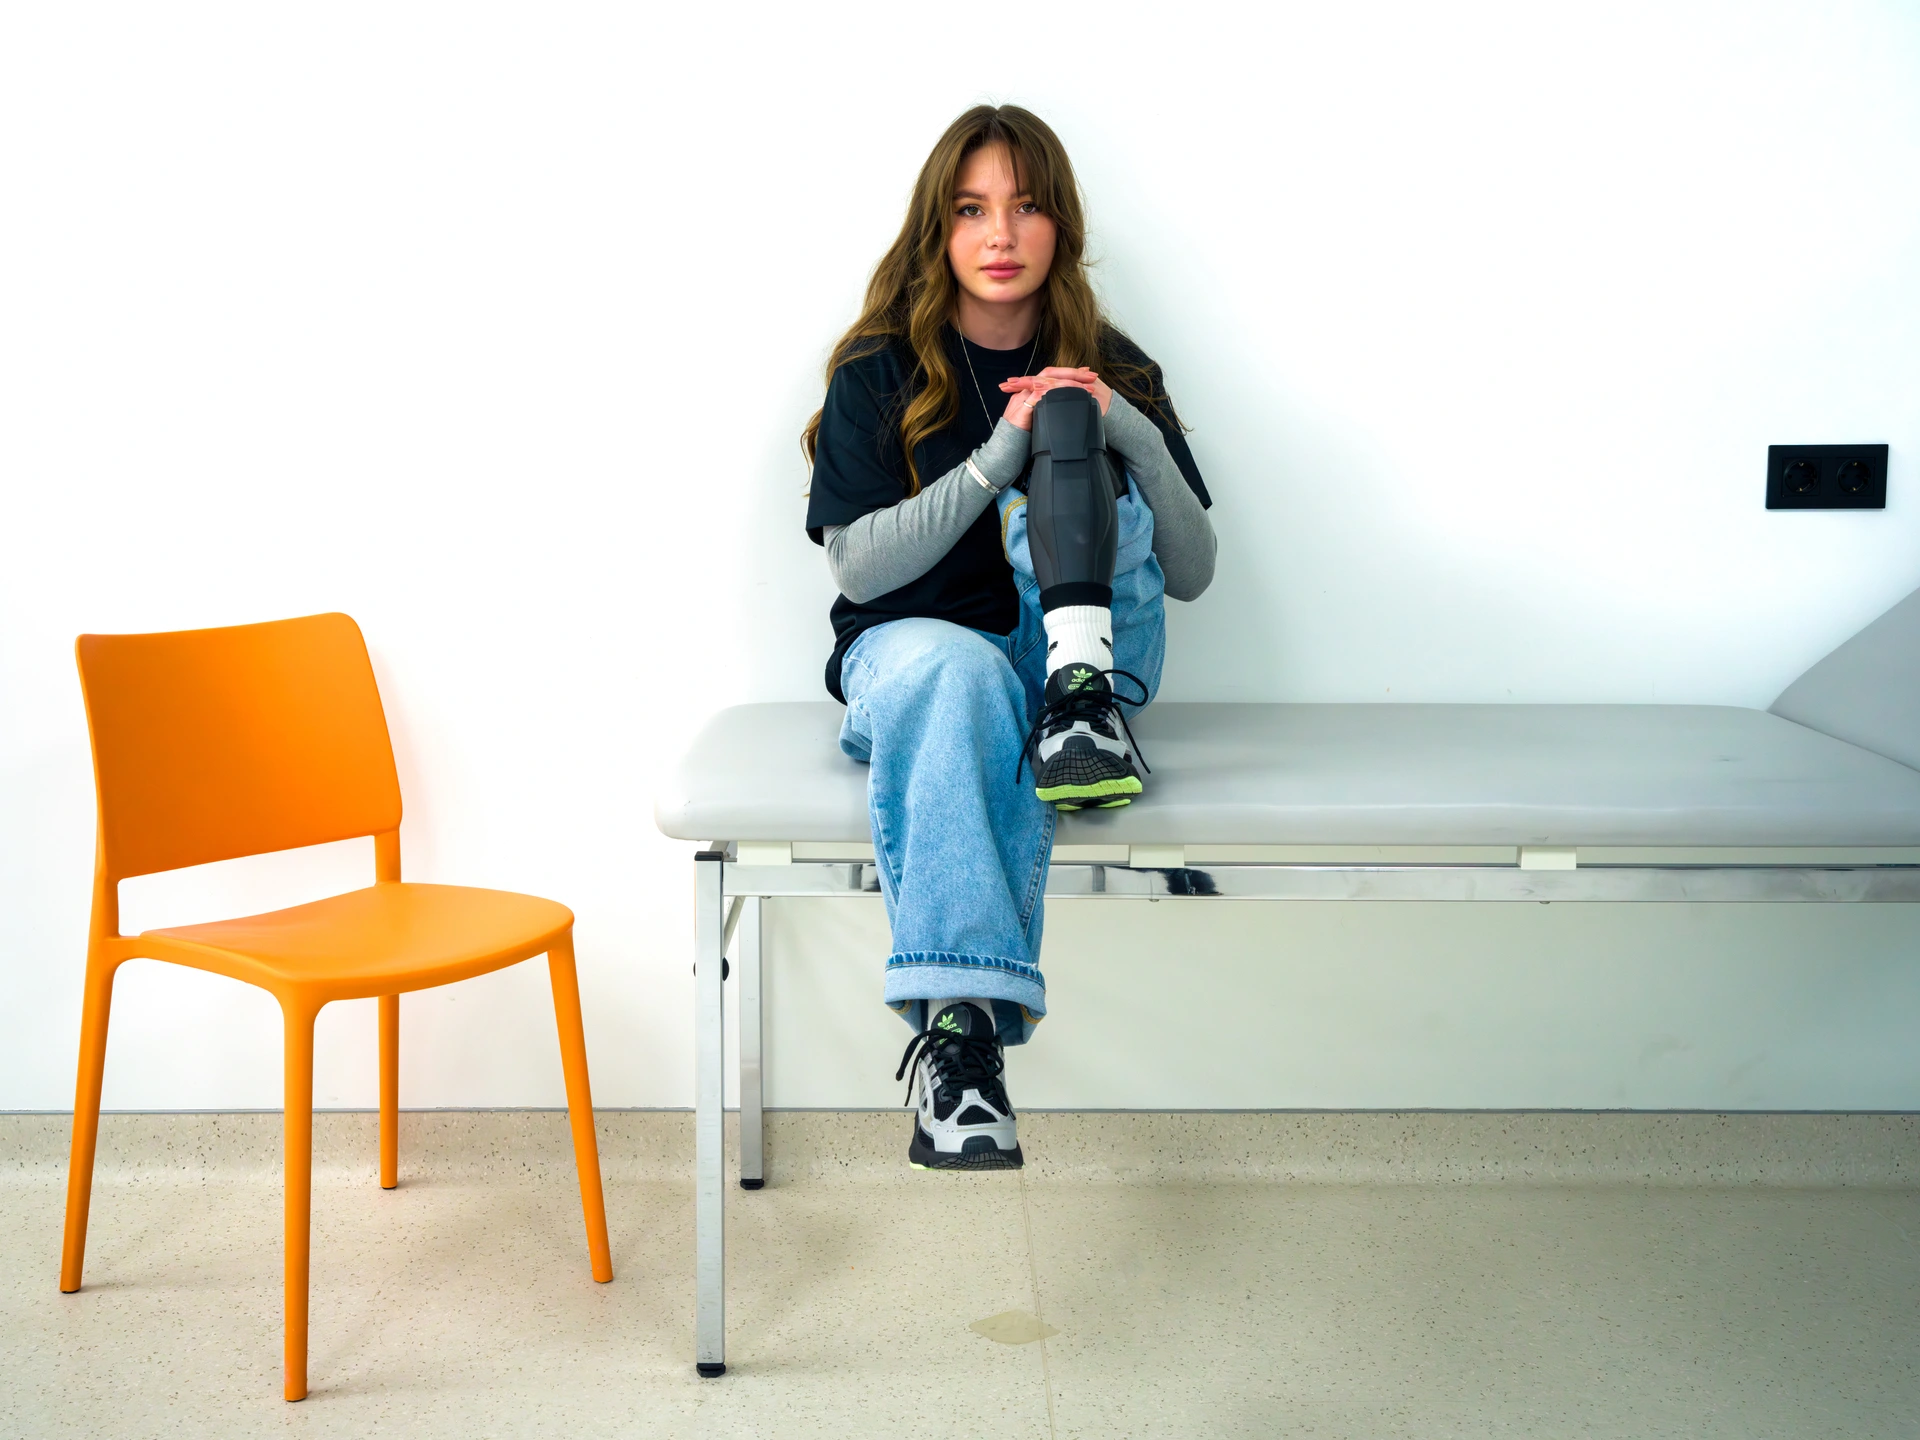 A girl, staring at the camera with a fixed expression, sits on a grey examination bed in a bare, white-walled room, with an orange plastic chair to her right. Her clasped hands are resting on the knee of her left leg, which is prosthetic and made of black plastic, its foot resting on the examination bed, while her right leg dangles in the air above the bed. She has long brown hair and is about 20 years old. She is wearing black and green trainers on both feet, baggy blue denim jeans, and a black t-shirt over a grey, long-sleeved sweatshirt. This is Rusya Danilkina, Advocate and first Contact of the Superhumans Centre in the city of Lviv in western Ukraine.